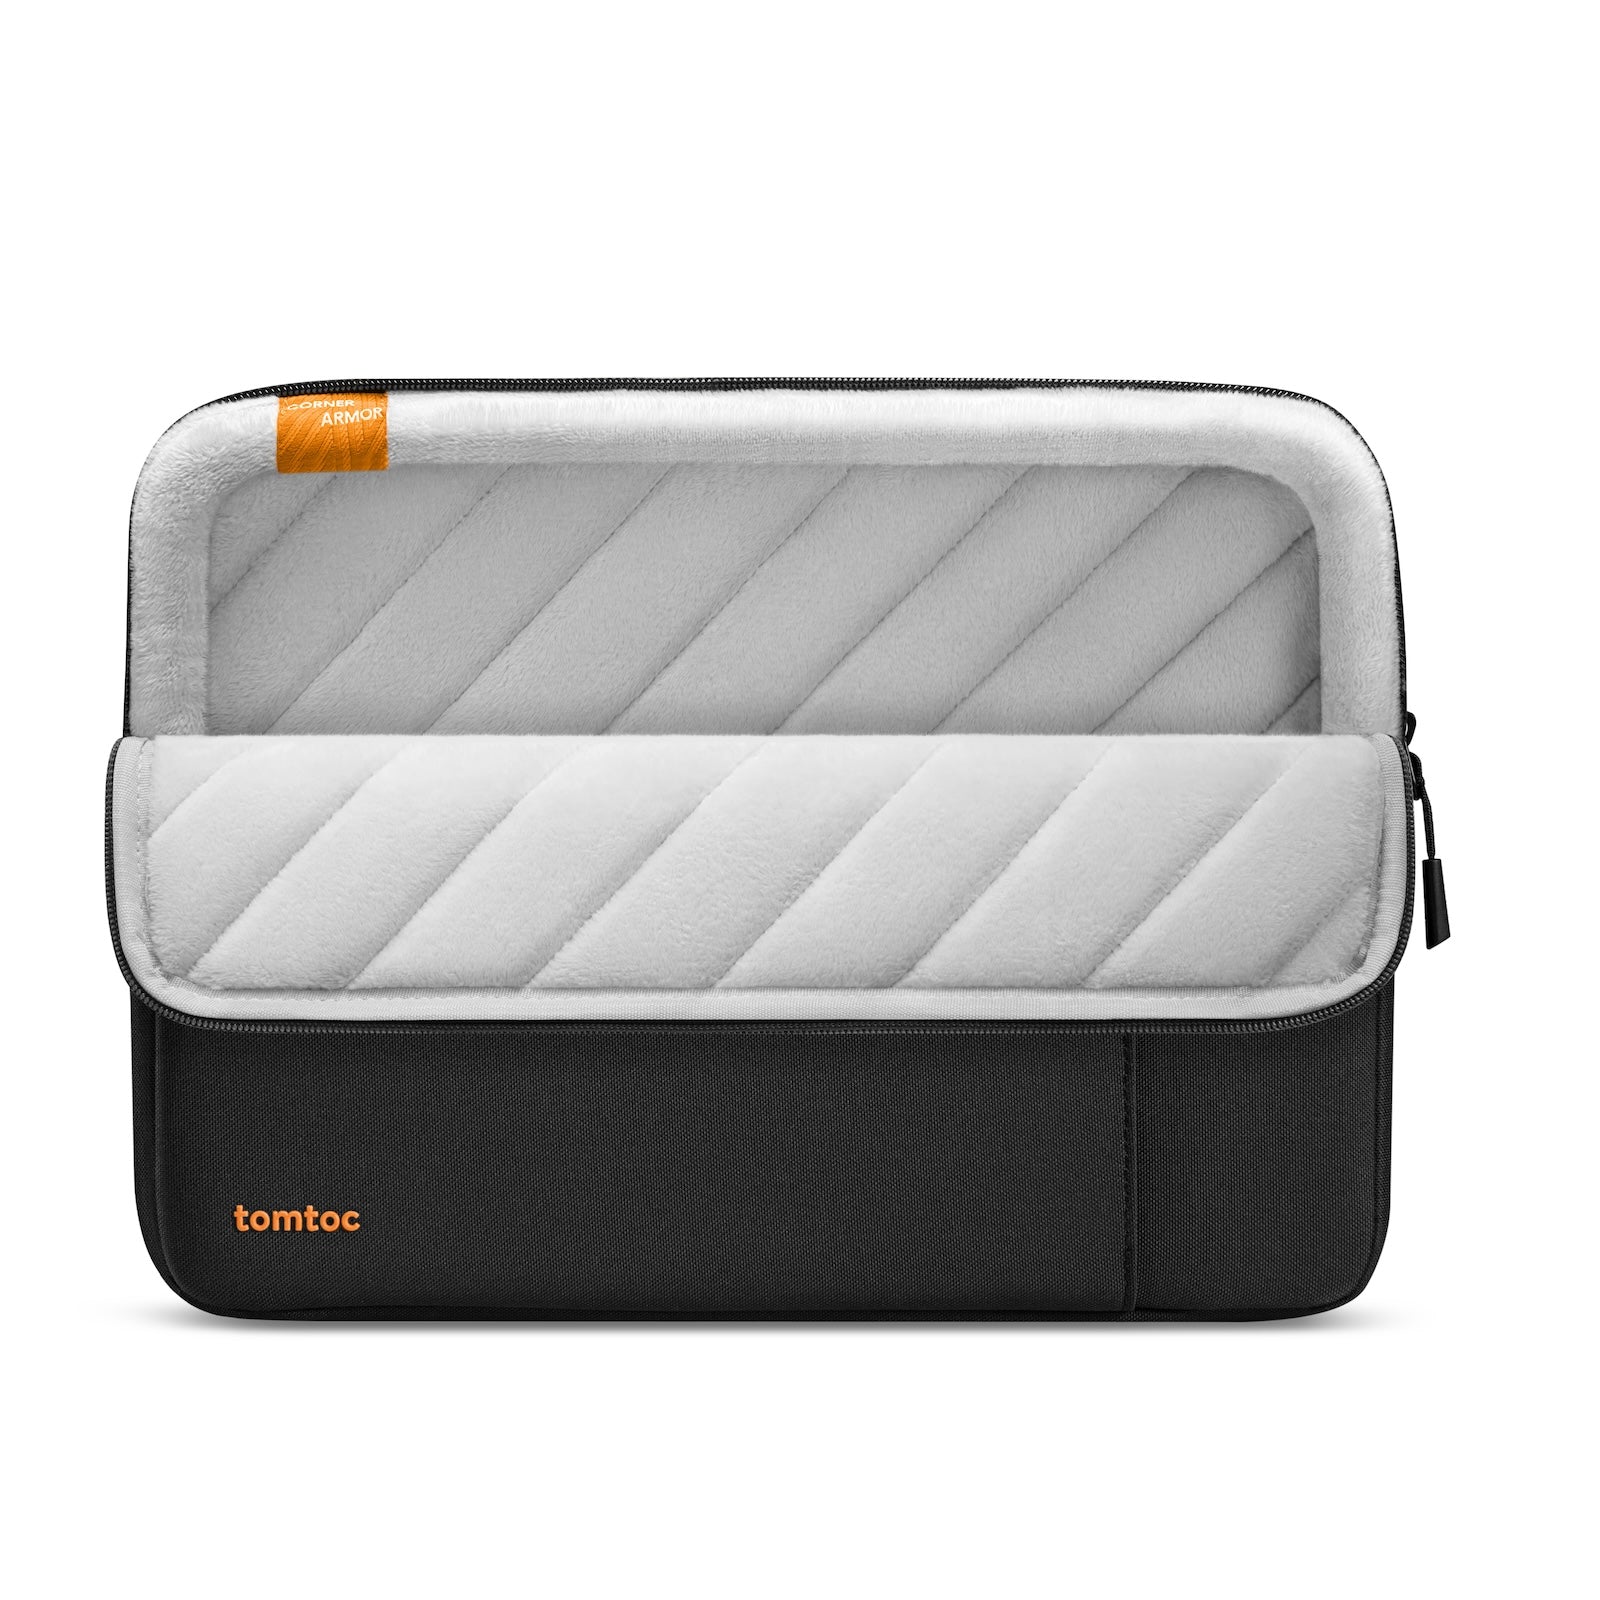 tomtoc Defender-A13 Laptop Sleeve - 16inch